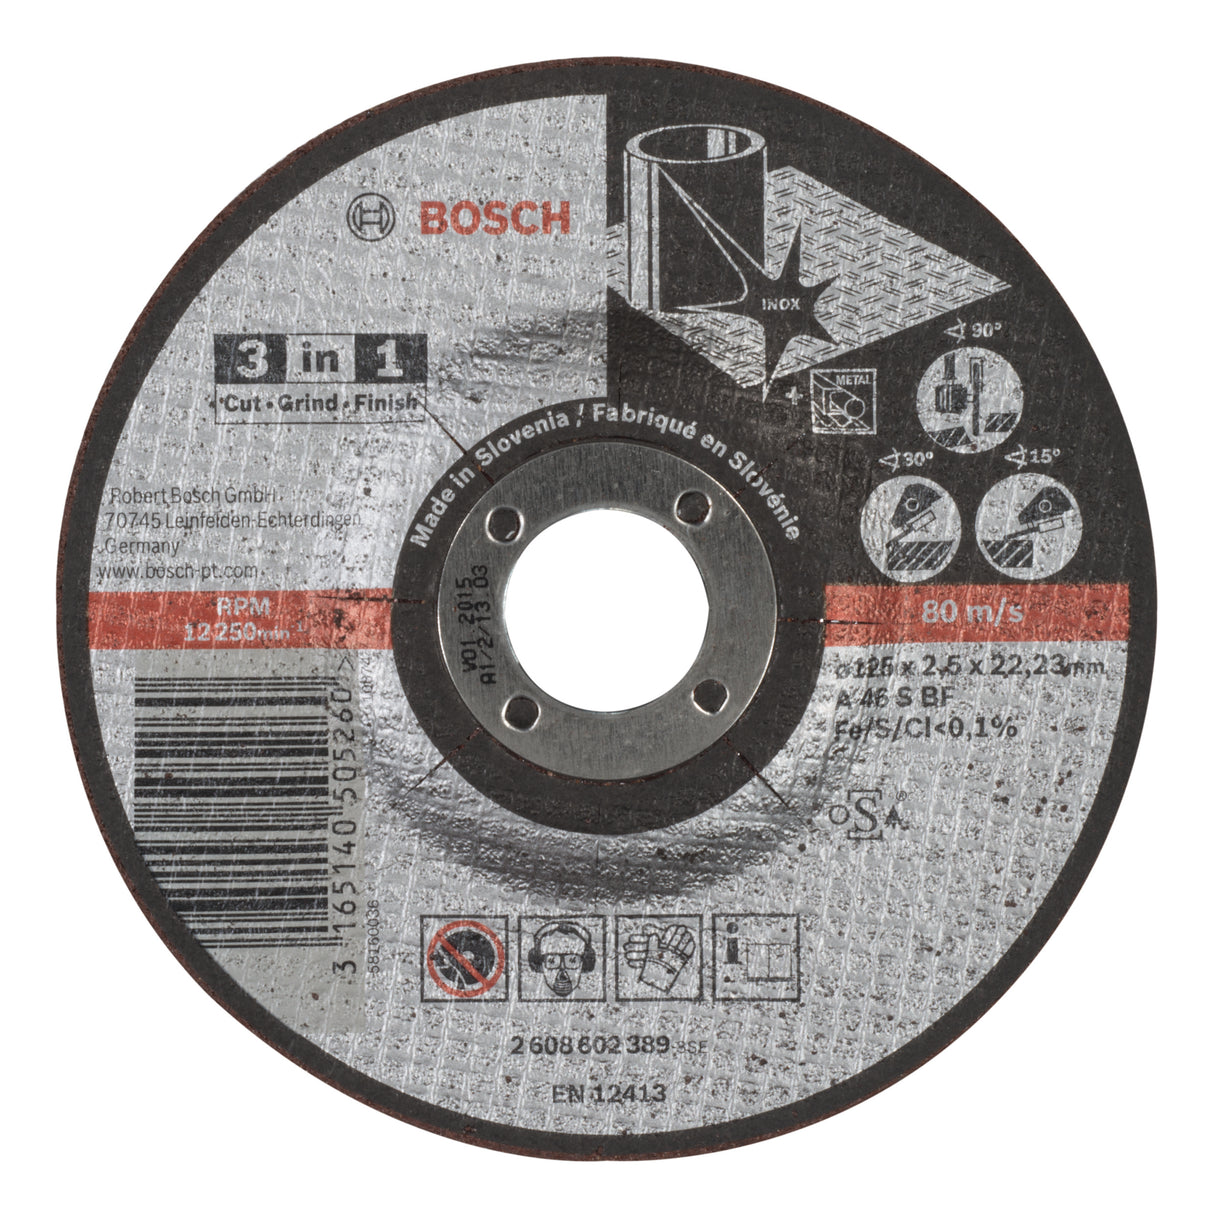 Bosch Professional 3-in-1 Cutting Disc A 46 S BF - 125mm x 2.5mm